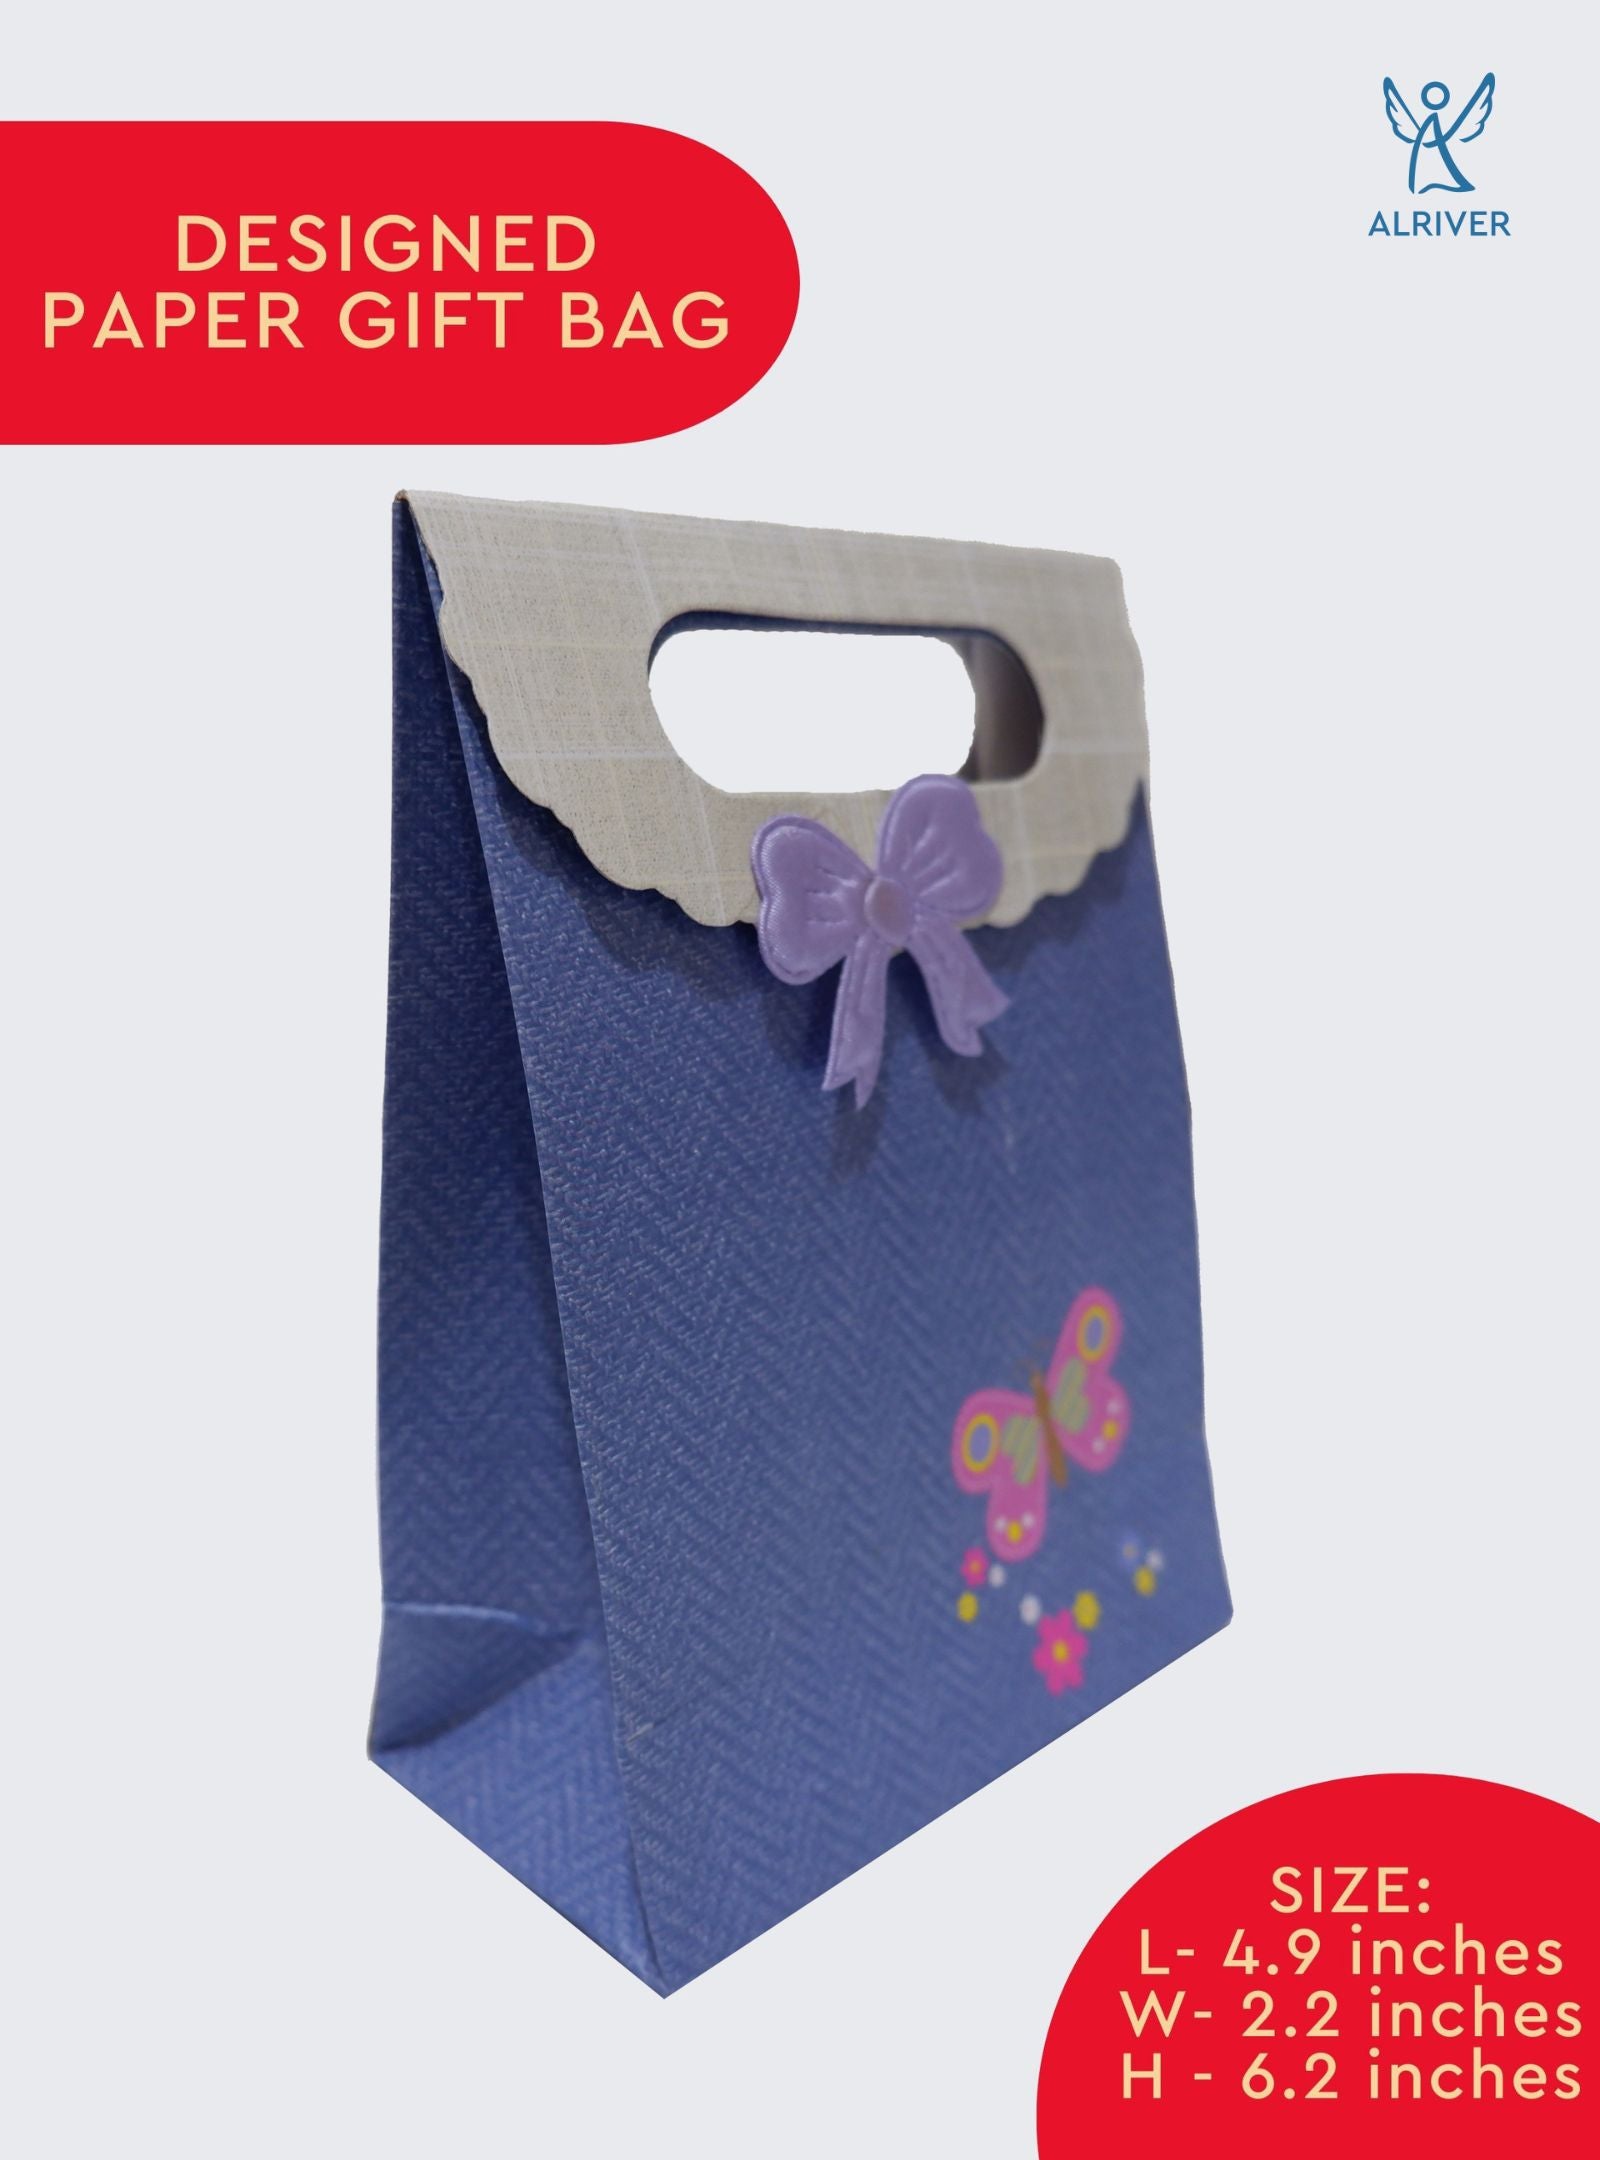 DENIM WITH PURPLE RIBBON |  SMALL PAPER GIFT BAG